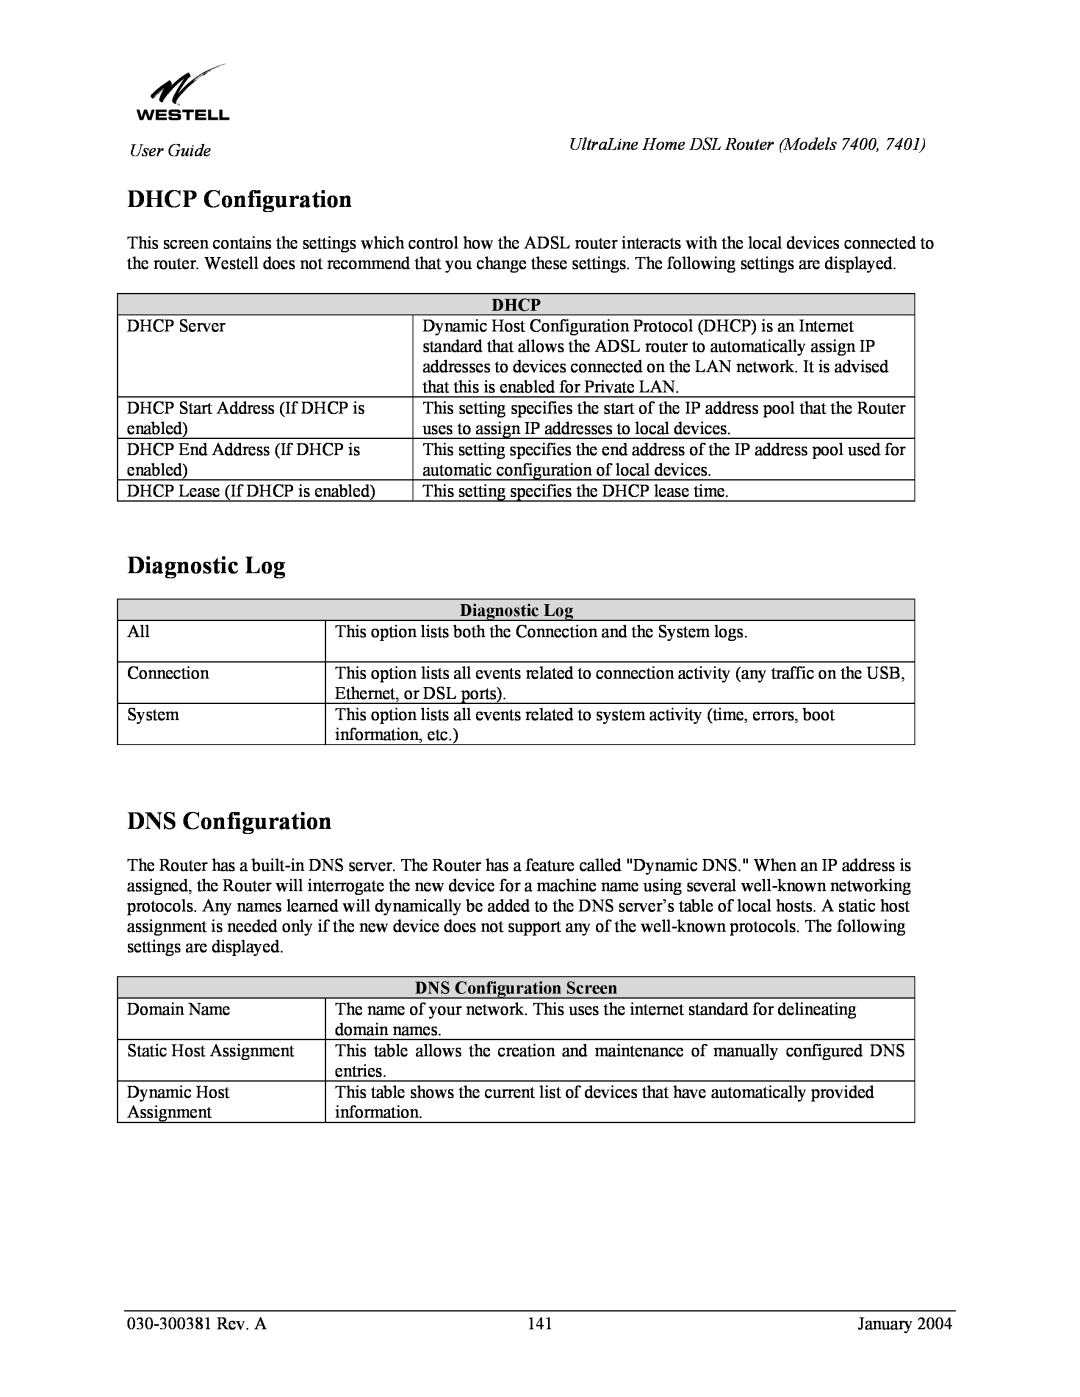 Westell Technologies 7400, 7401 manual DHCP Configuration, Diagnostic Log, Dhcp, DNS Configuration Screen 